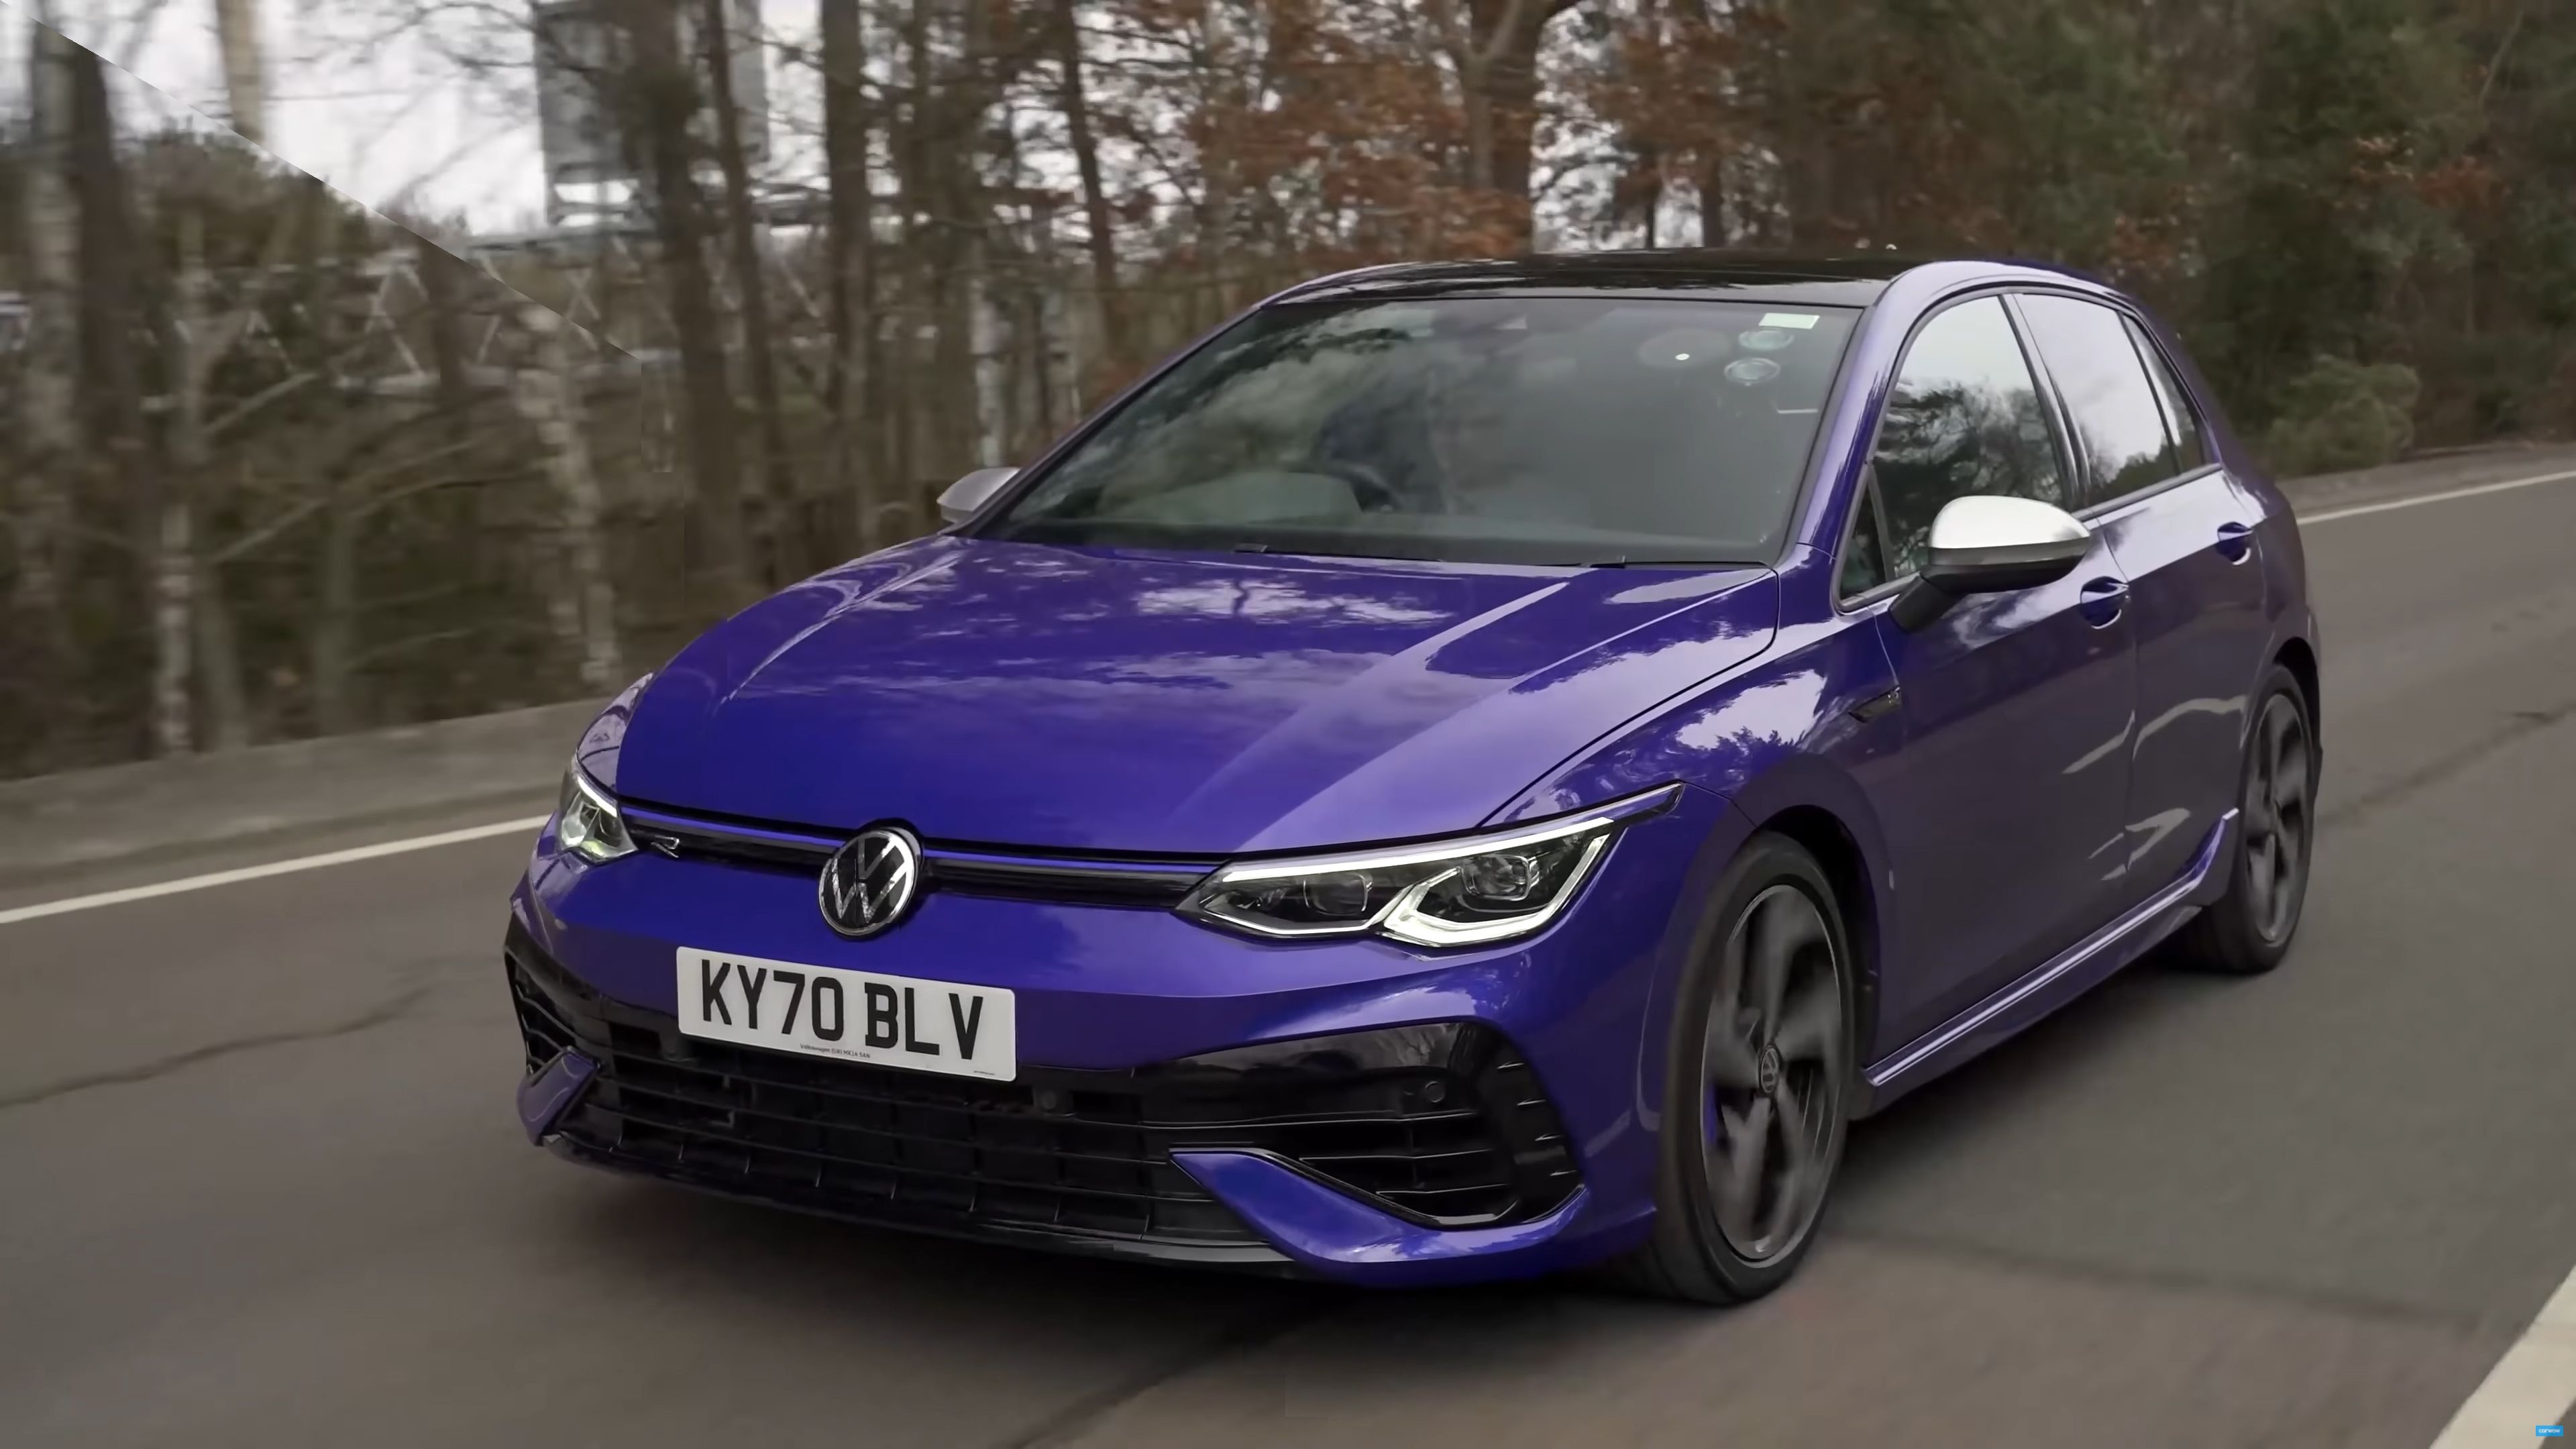 060 MPH In 4 Seconds? That's Seriously the 2021 Volkswagen Golf R